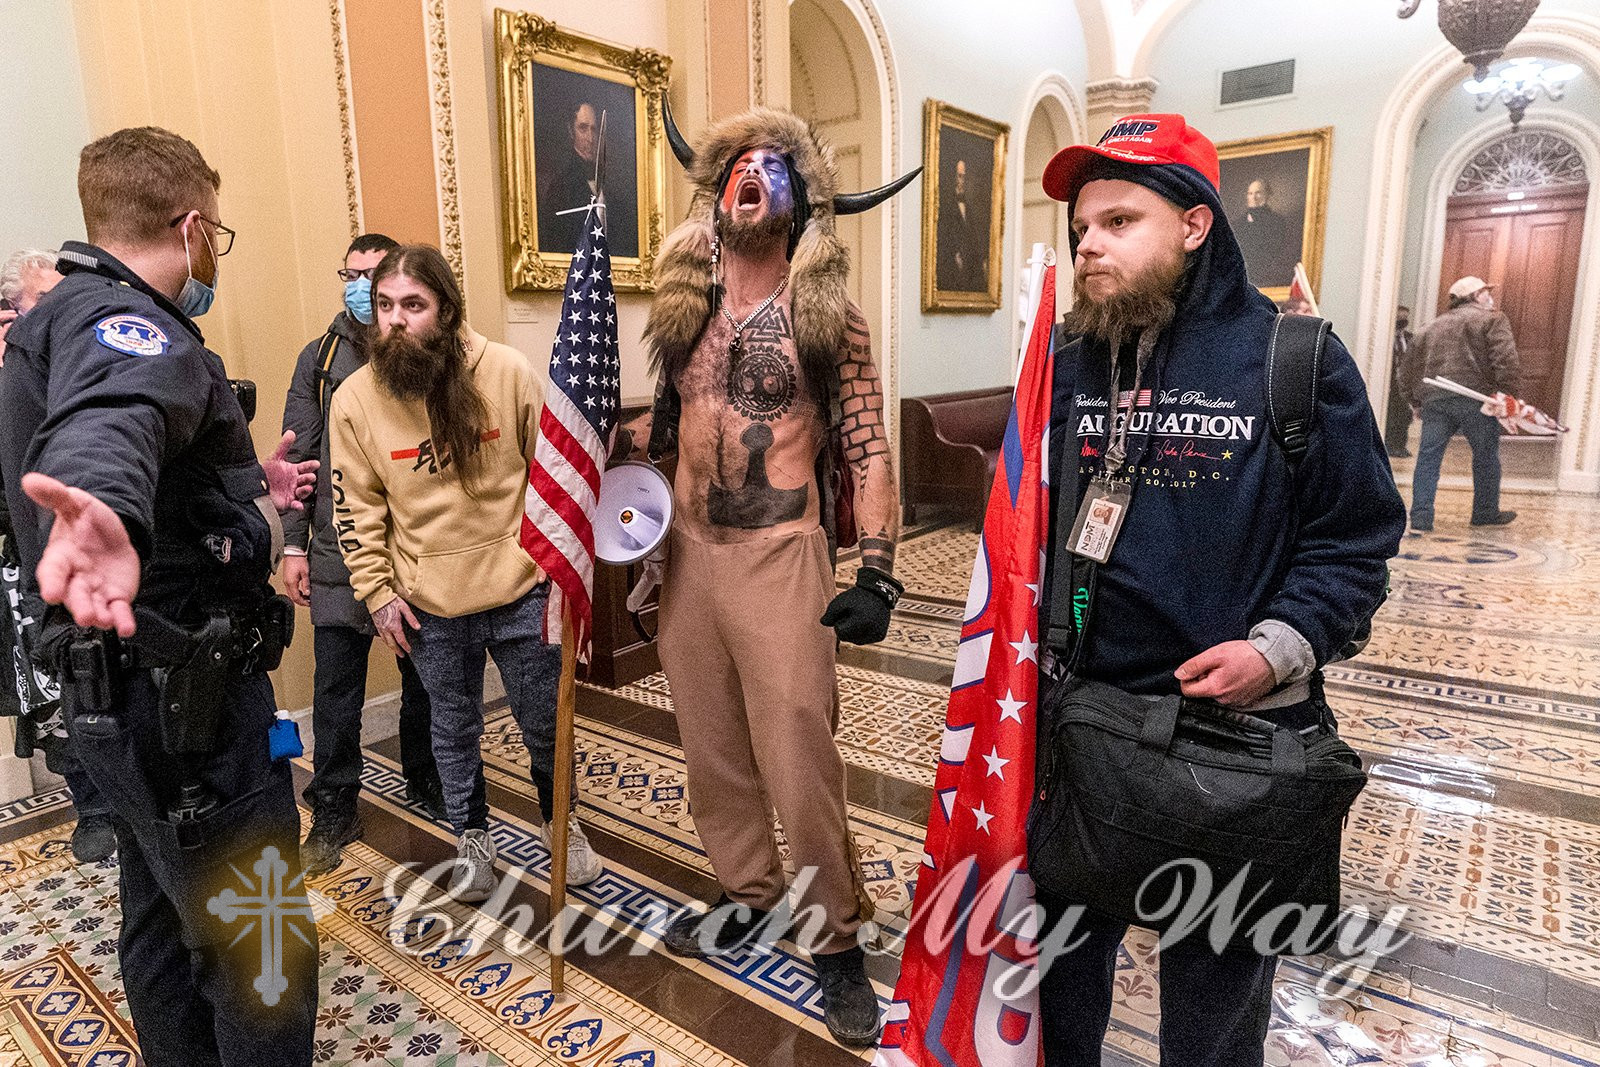 Jacob Chansley, center, better known as the “QAnon Shaman,” and other supporters of then-President Donald Trump are confronted by Capitol Police officers outside the Senate Chamber inside the Capitol, Jan. 6, 2021, in Washington. (AP Photo/Manuel Balce Ceneta)